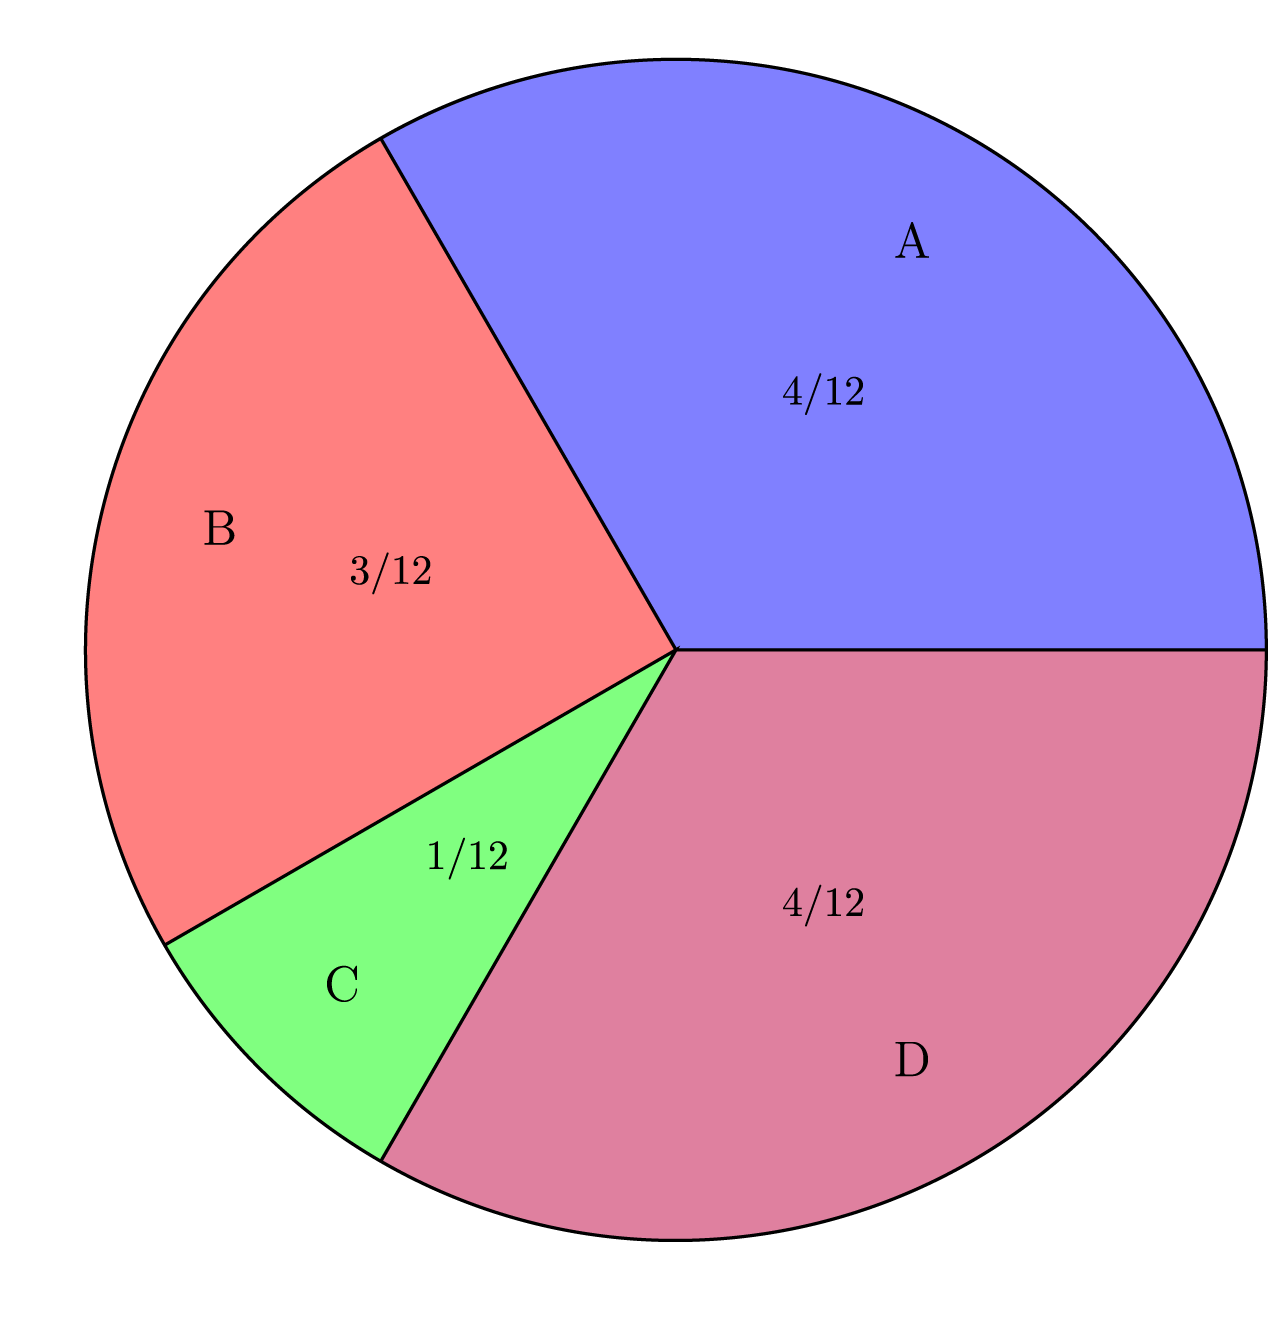 Pie chart for the spinner game. The wedge of A is 4/12 of the chart. The wedge of B is 3/12 of the chart. The wedge of C is 1/12 of the chart. The wedge of D is 4/12 of the chart.